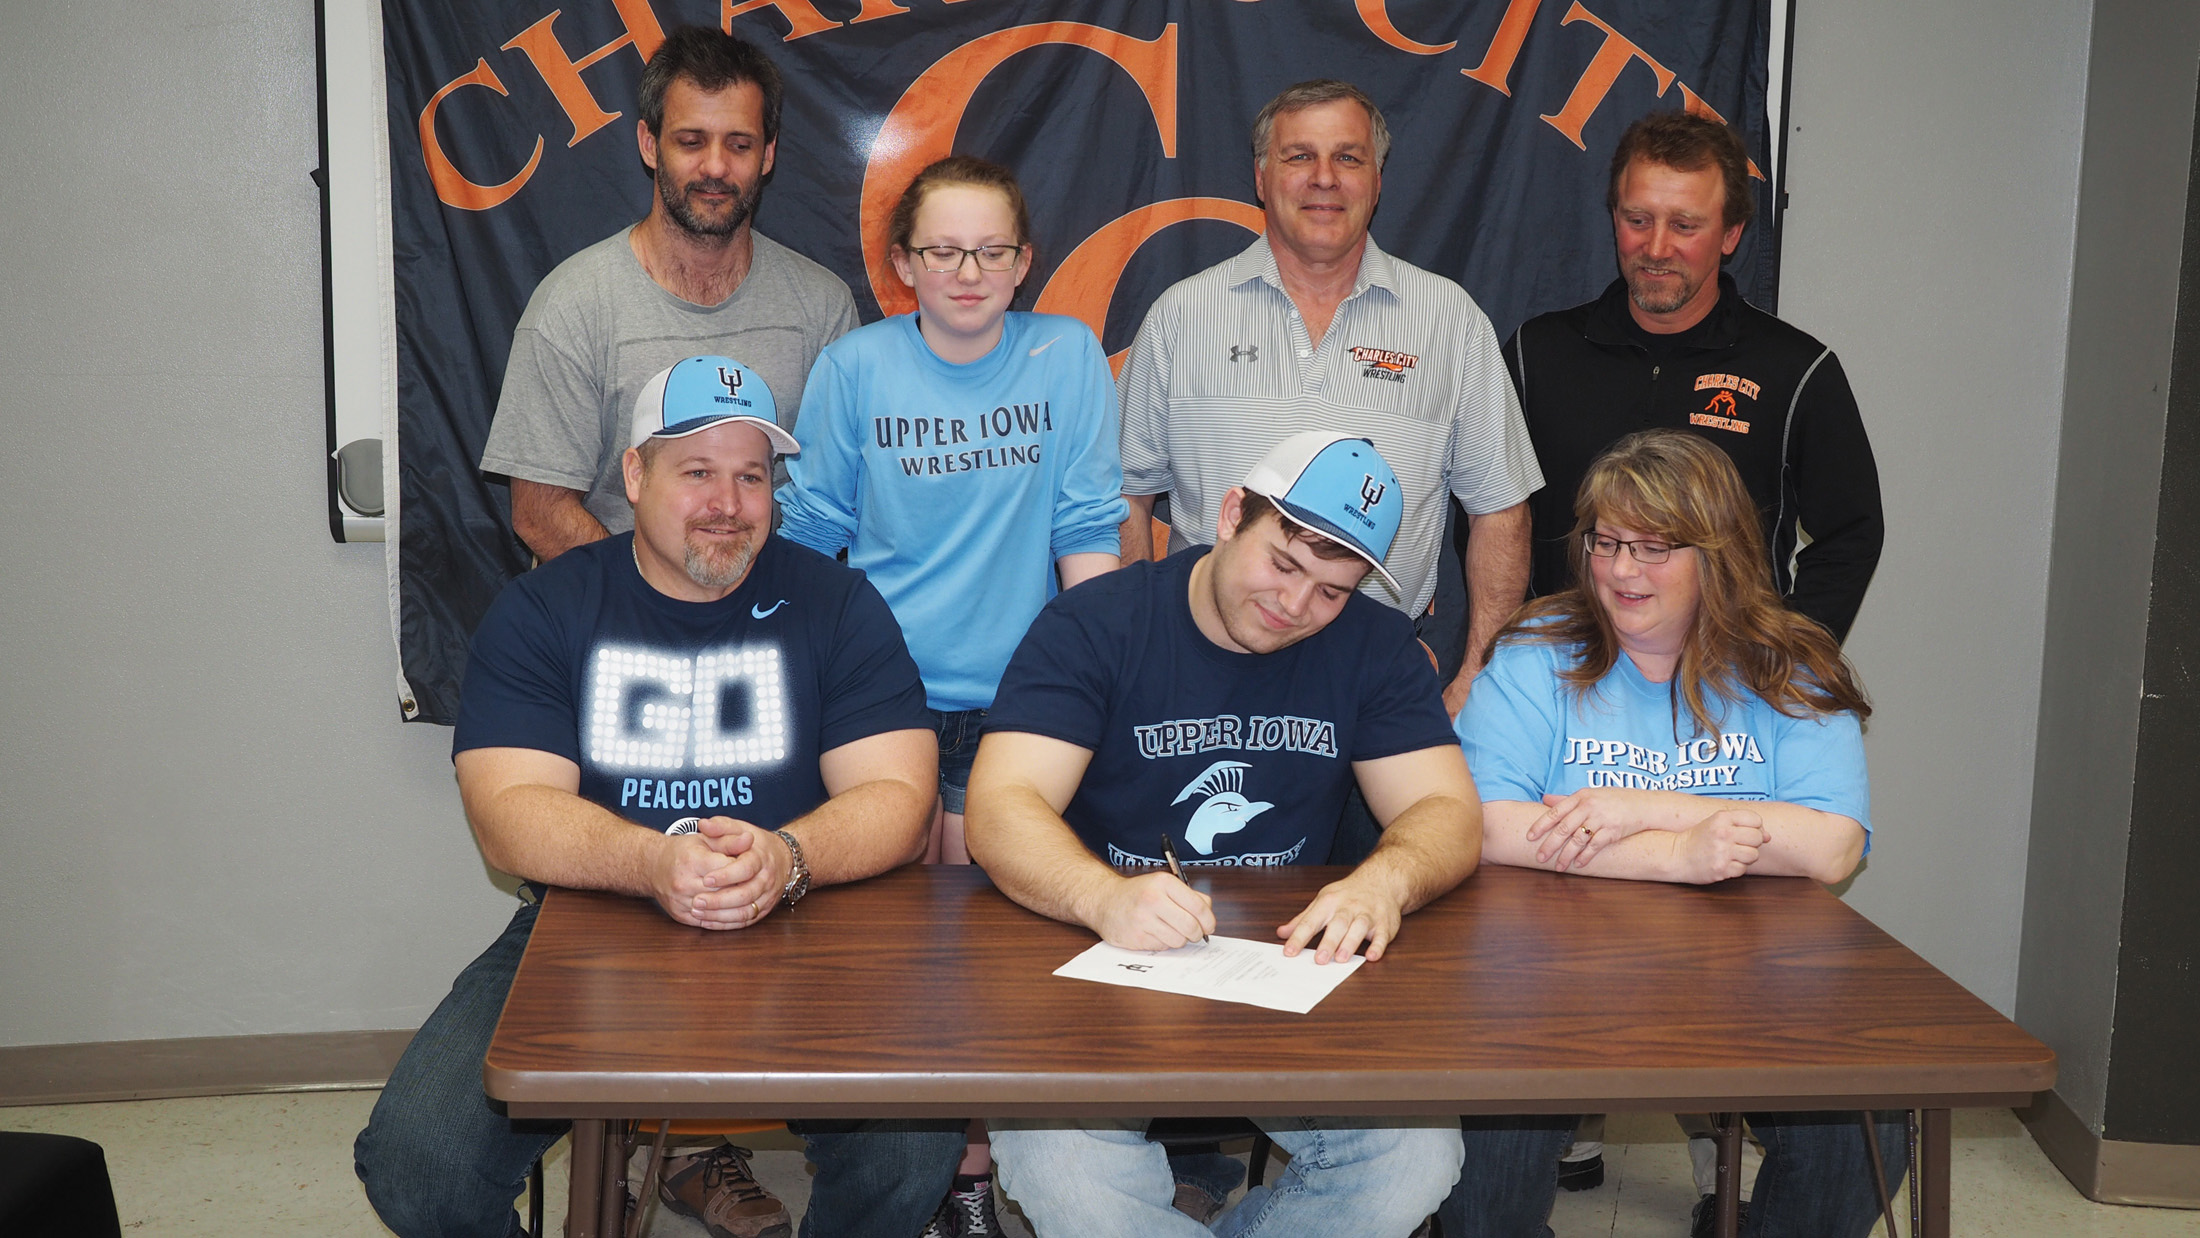 AJ Maloy signs to continue his wrestling career at Upper Iowa